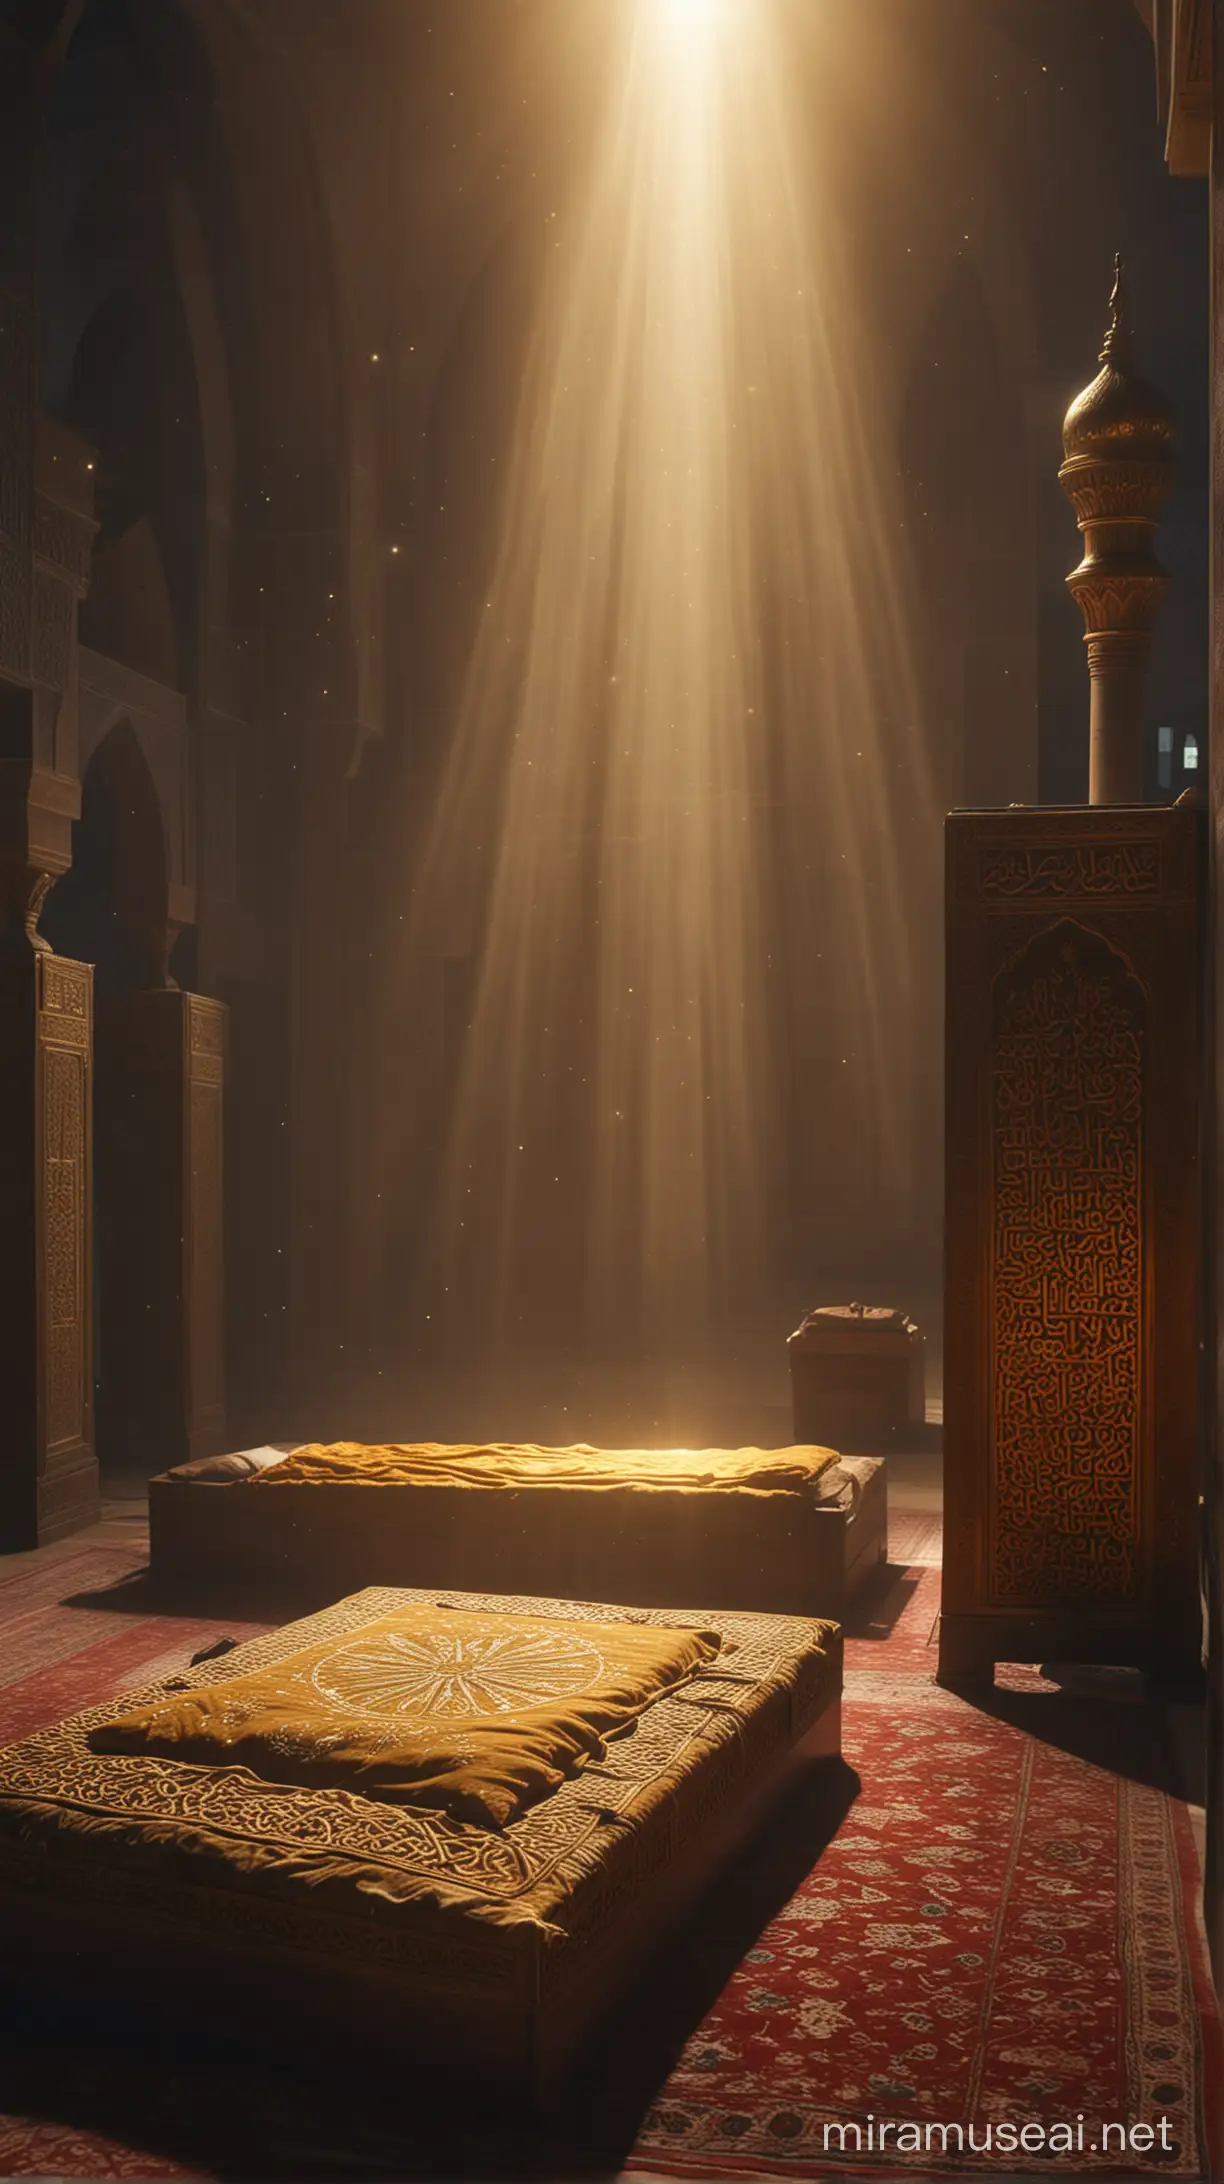 An evocative scene capturing the spiritual presence of Muhammad, with rays of golden light emanating from his resting place, illuminating the darkness and inspiring reverence and devotion in those who behold it.






, 4K HD with islamic tradition